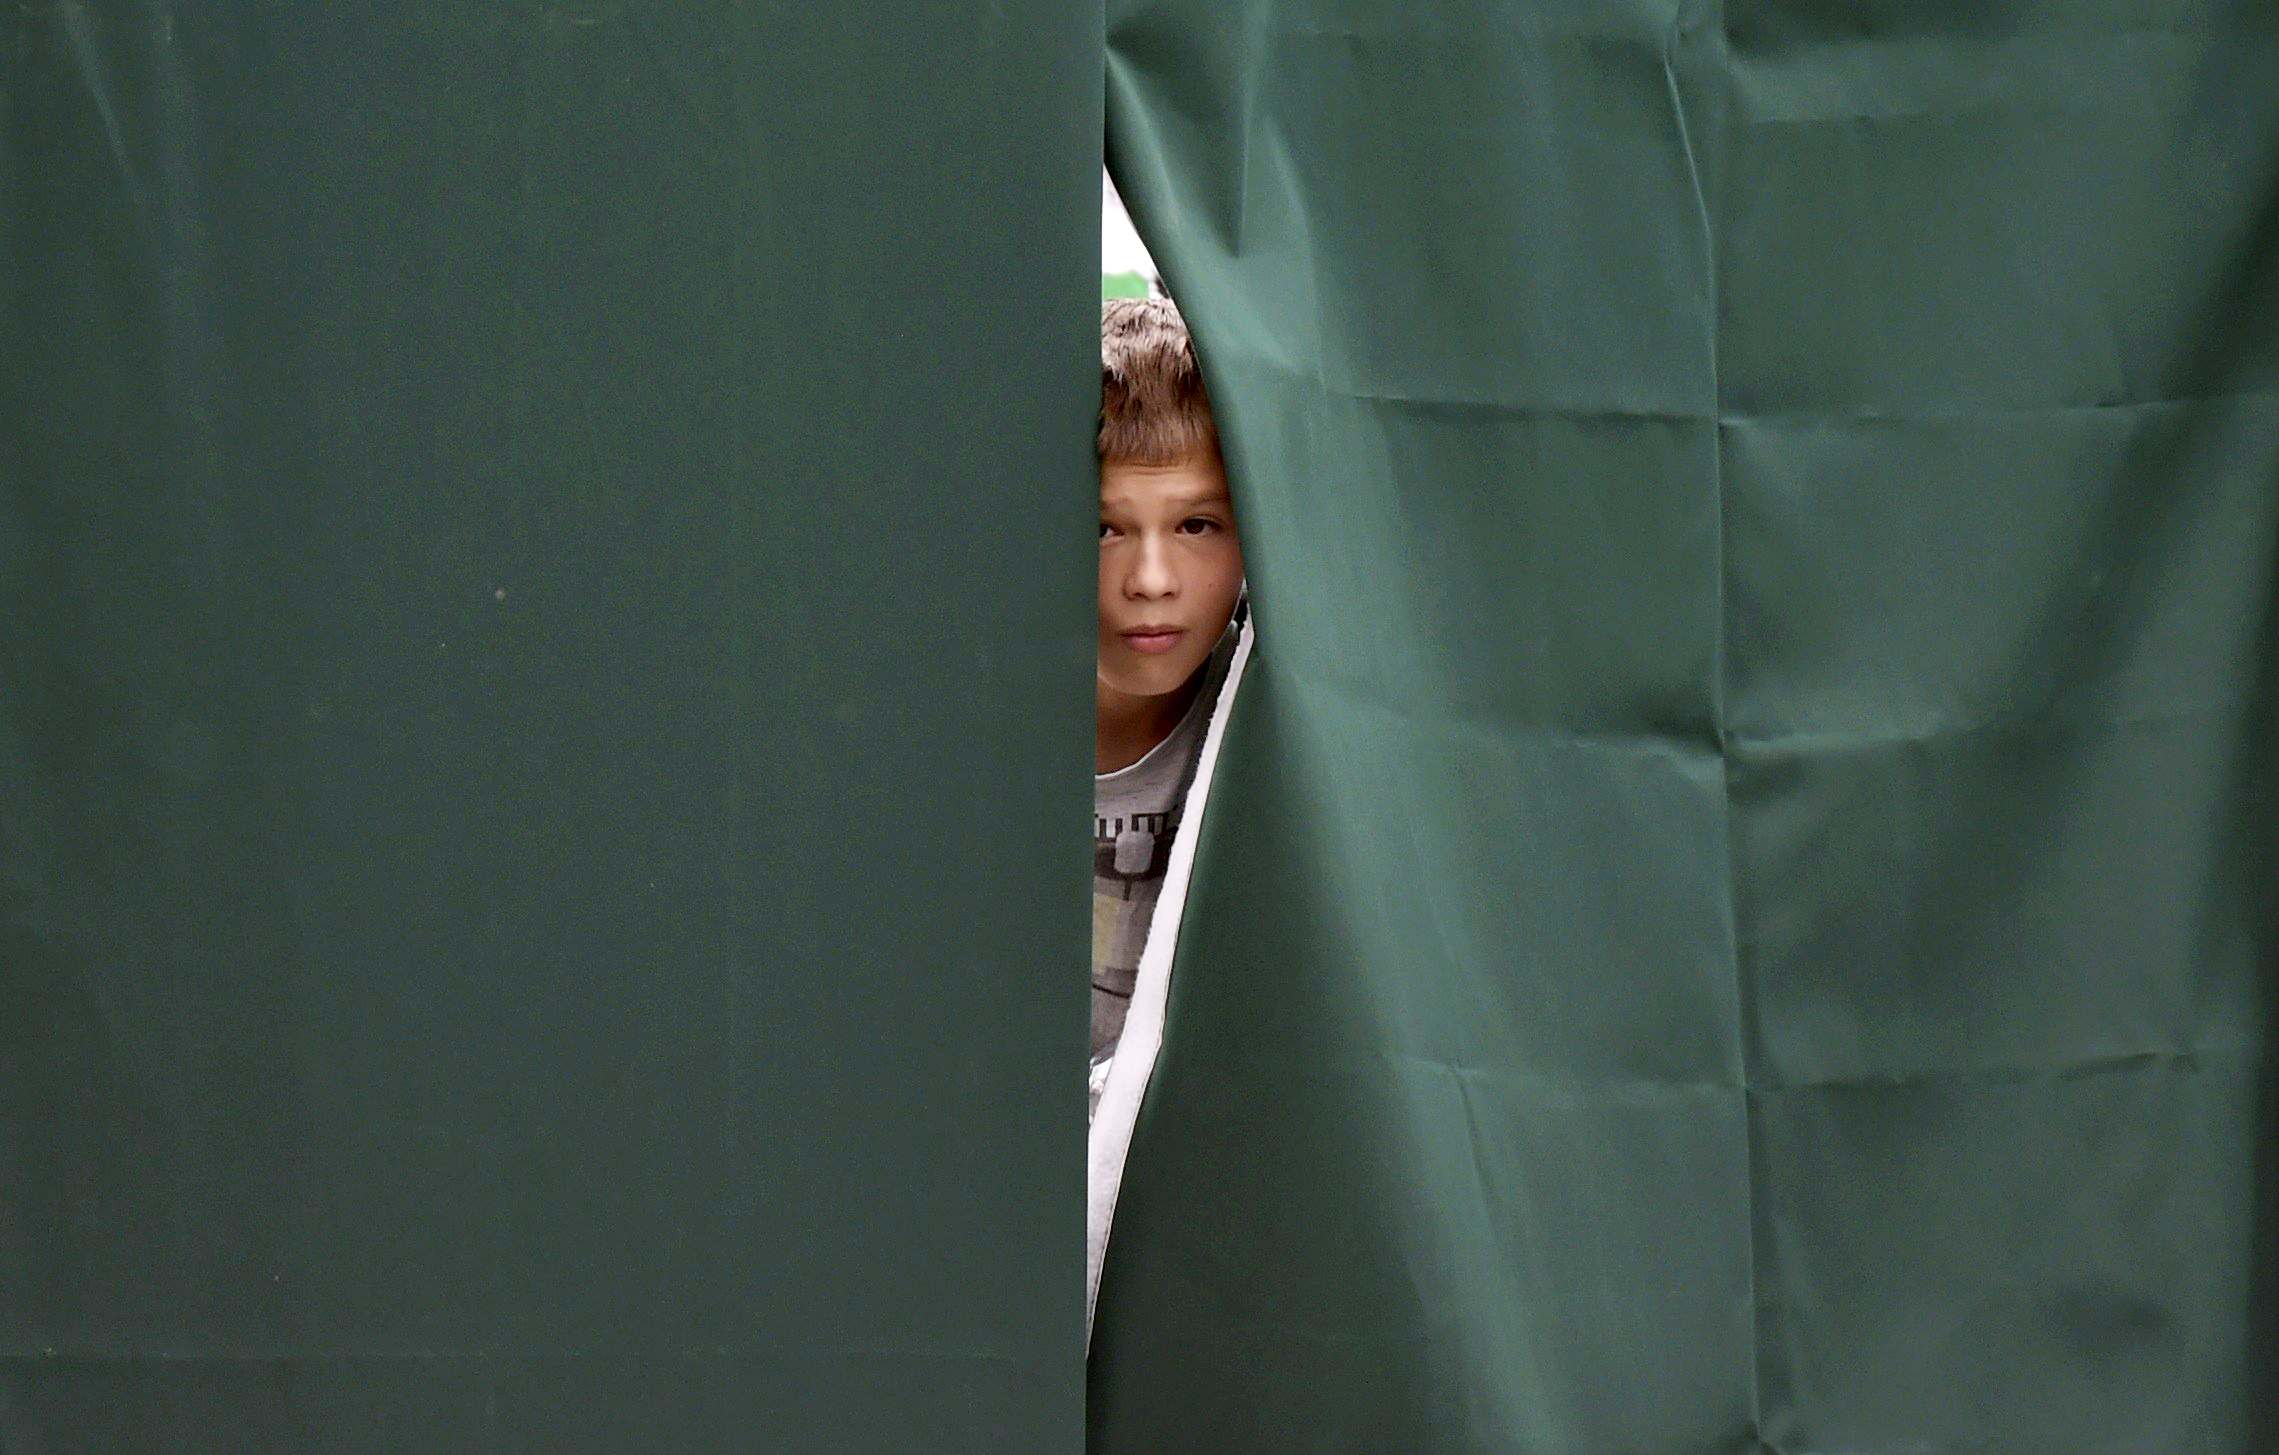 A boy looks through a gap in canvas screening on Court 12 at the Wimbledon Tennis Championships, in London